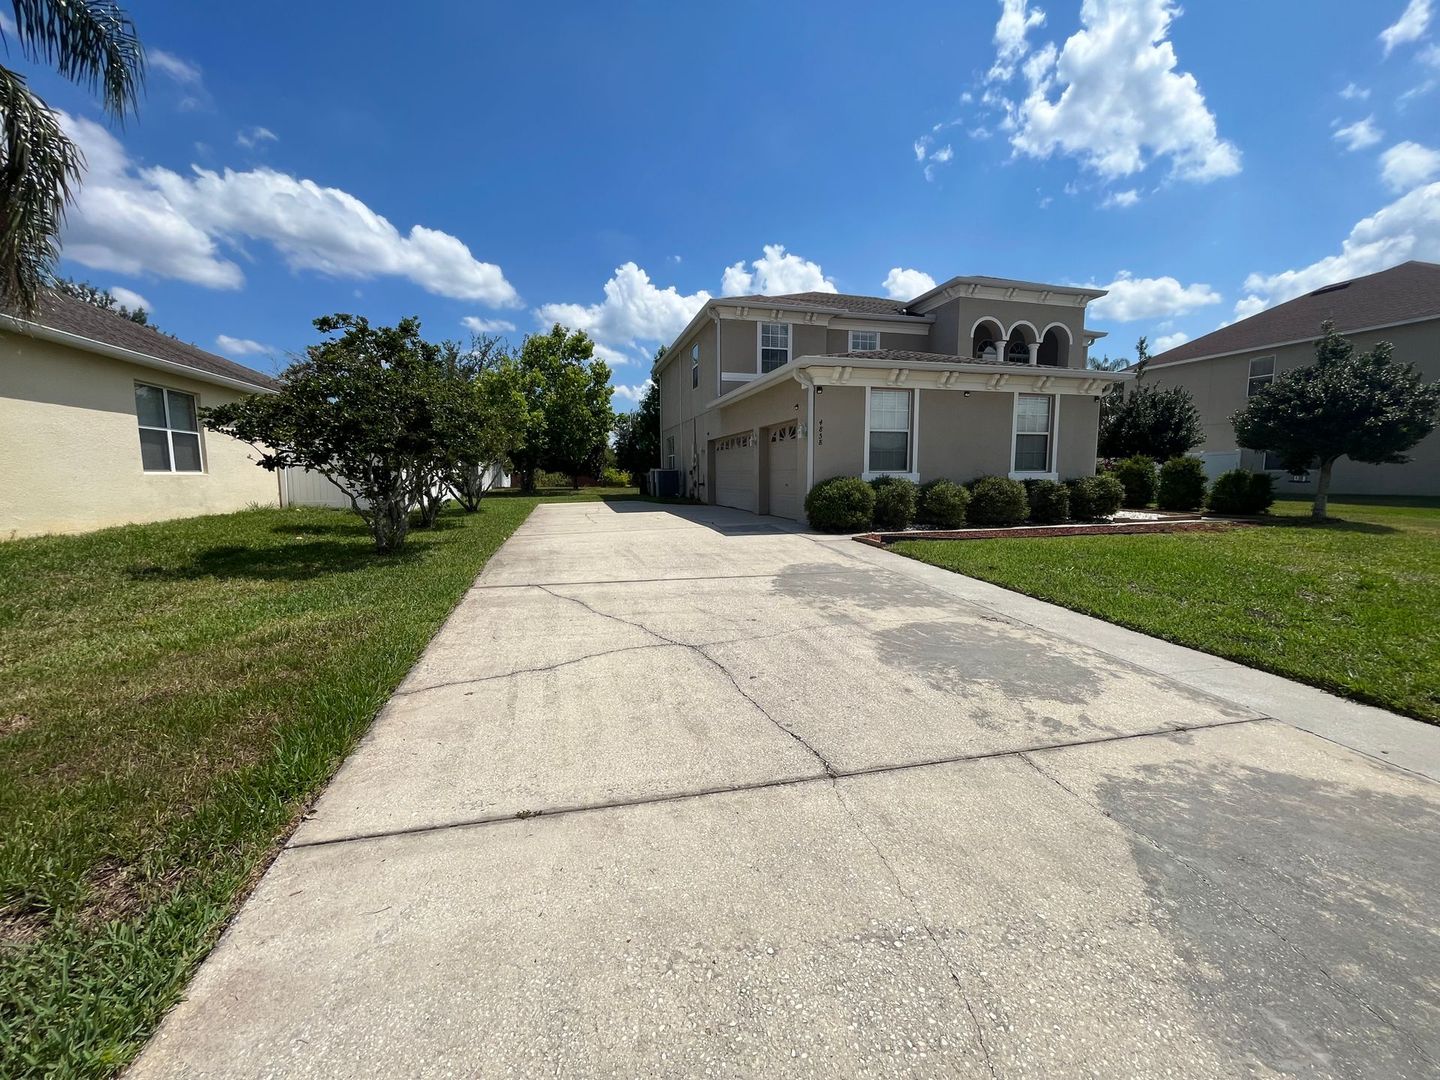 This beautiful 5-bedroom, 2.5-bathroom 3 car garage  home is located in beautiful  Saint cloud just a few minutes from Lake Nona